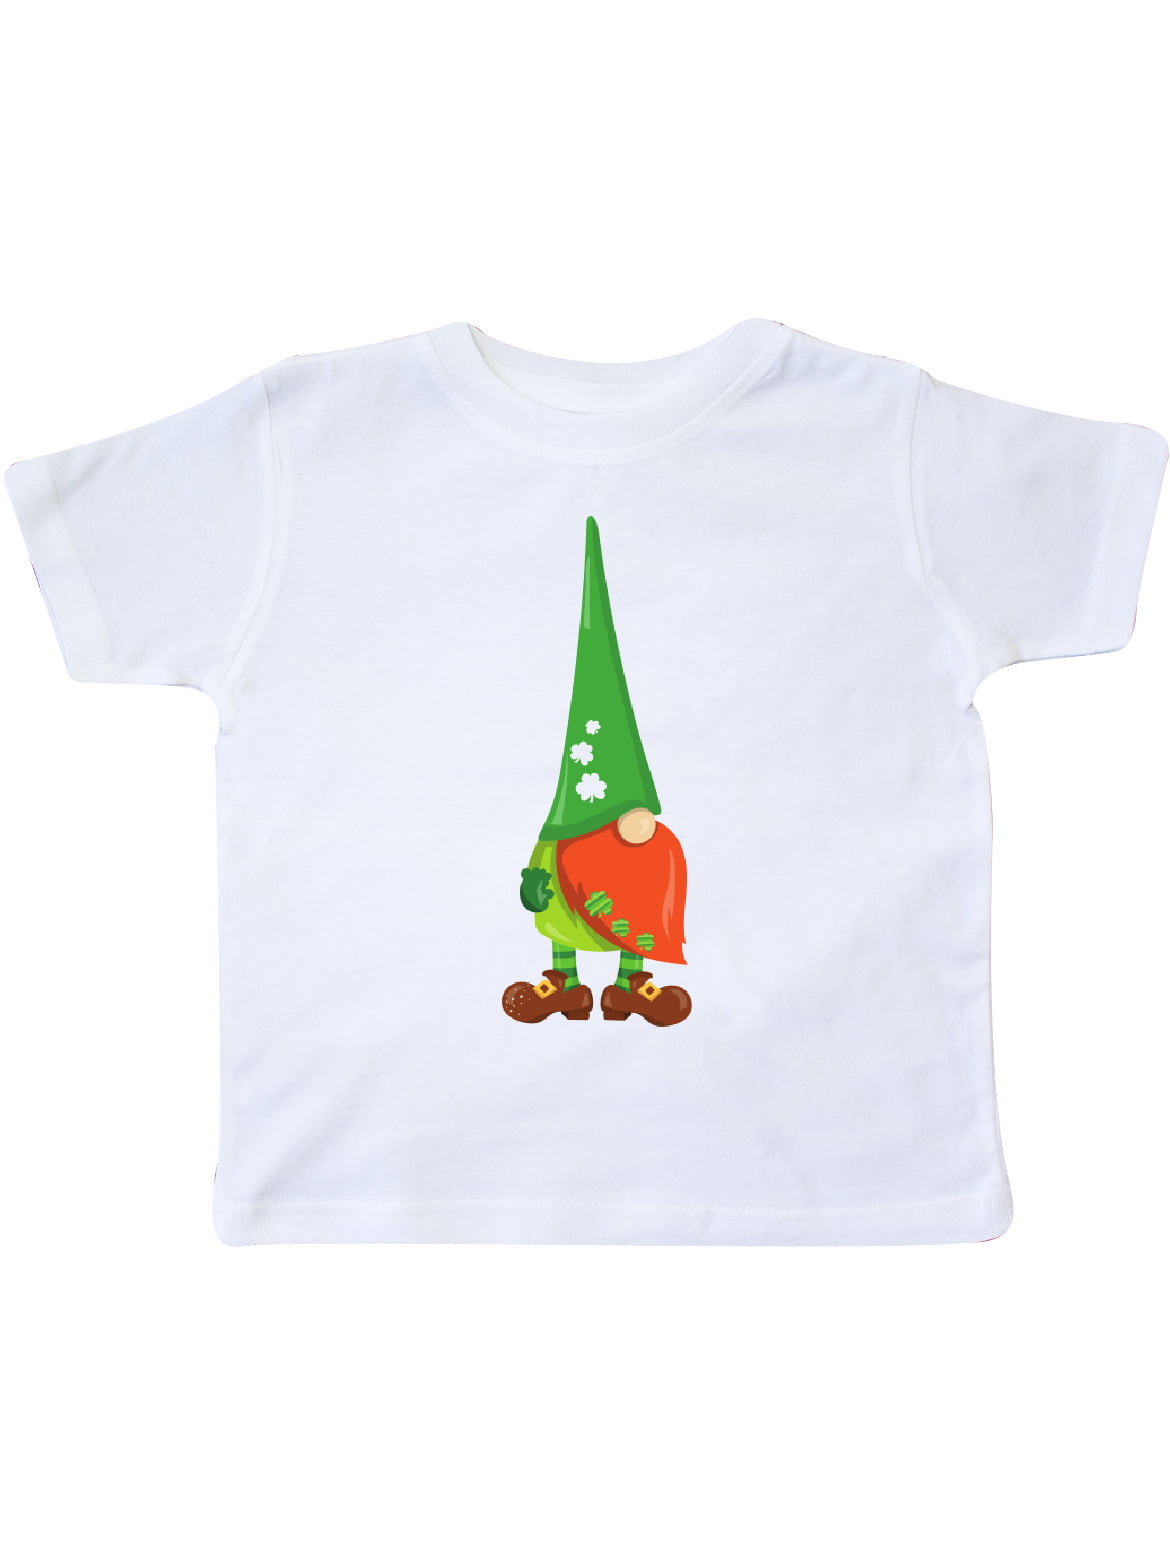 Download Saint Patrick's Day Gnome, Gnome With Green Hat Toddler T ...